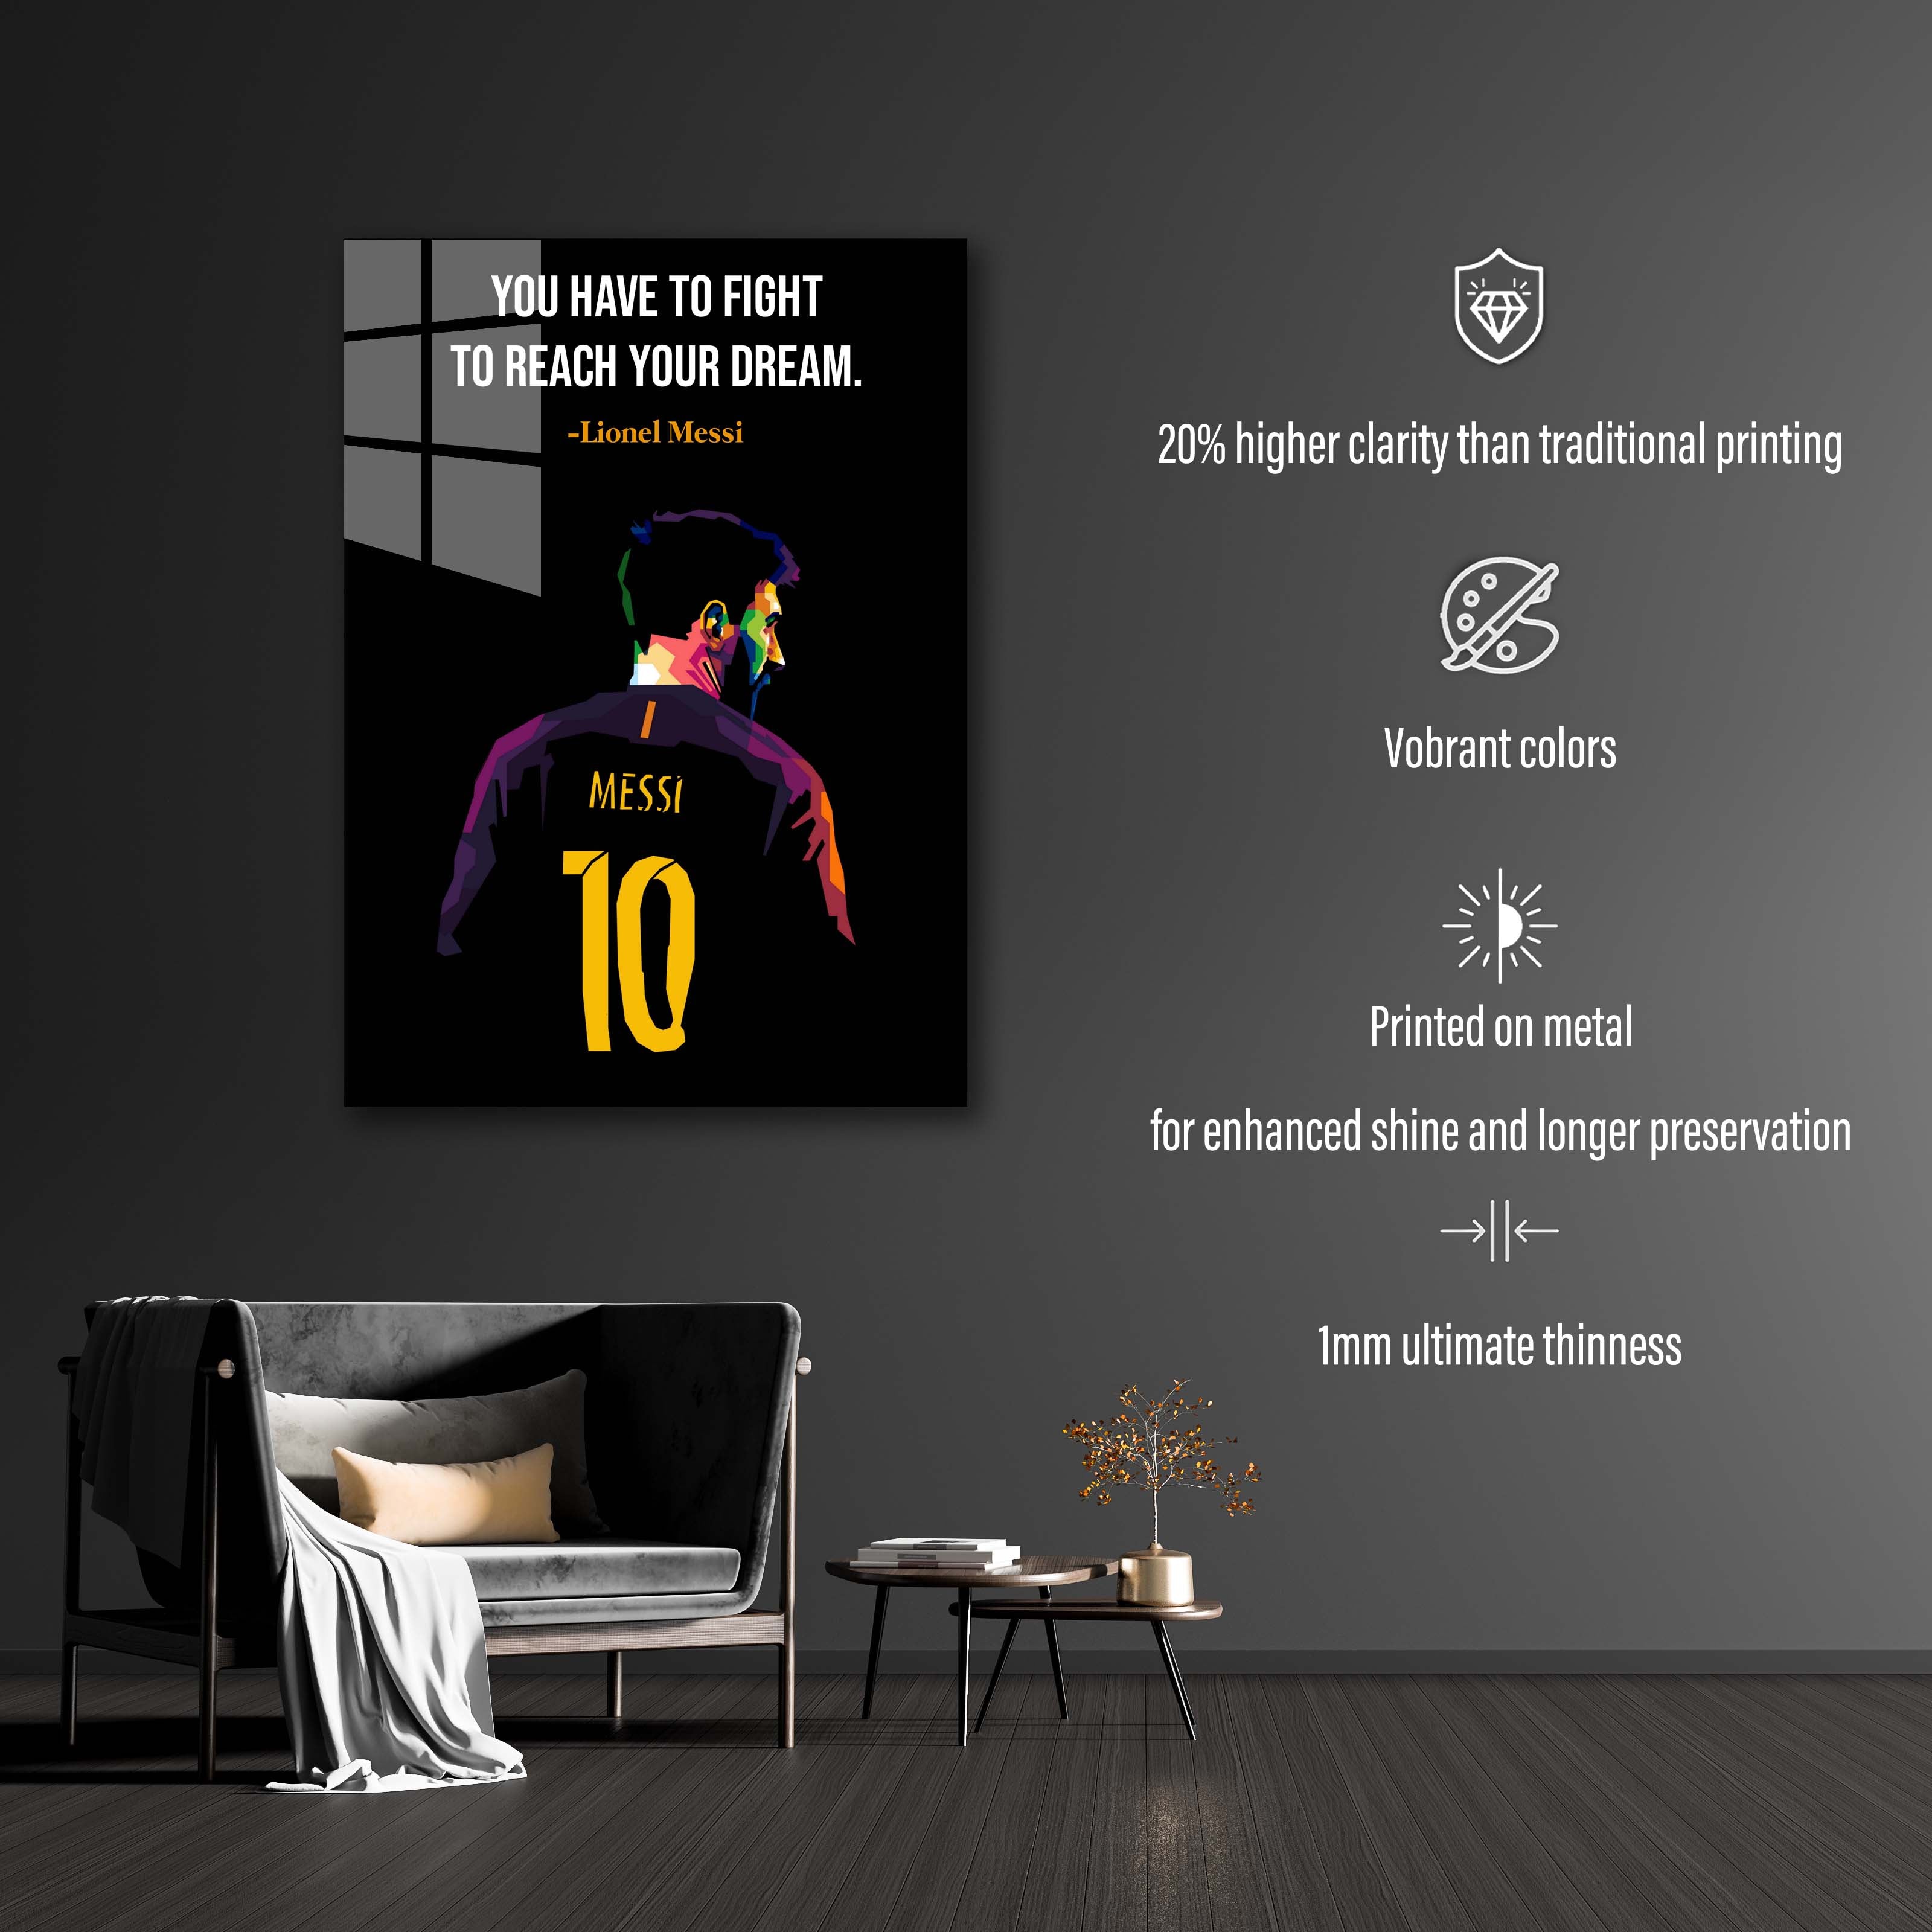 Messi Quote-designed by @Pus Meong art